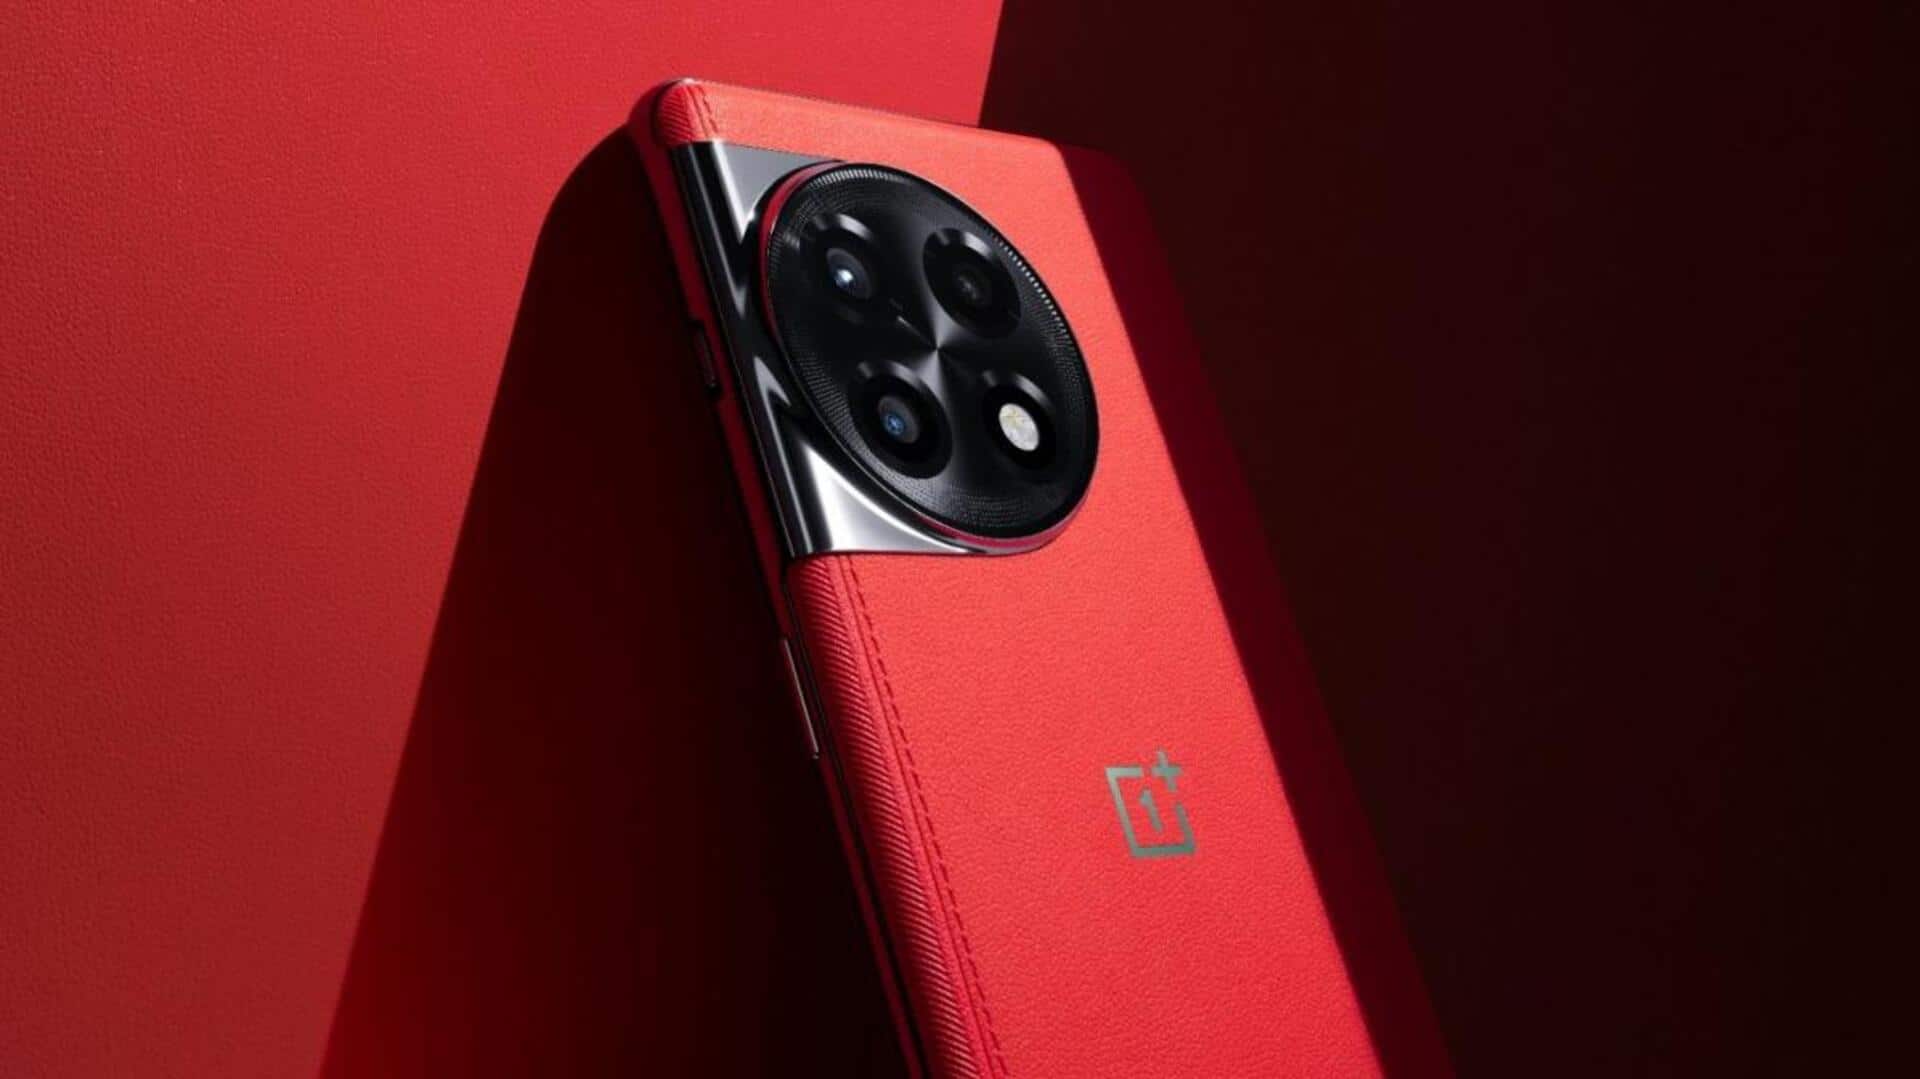 OnePlus India teases red-colored smartphone; likely to be OnePlus 11R